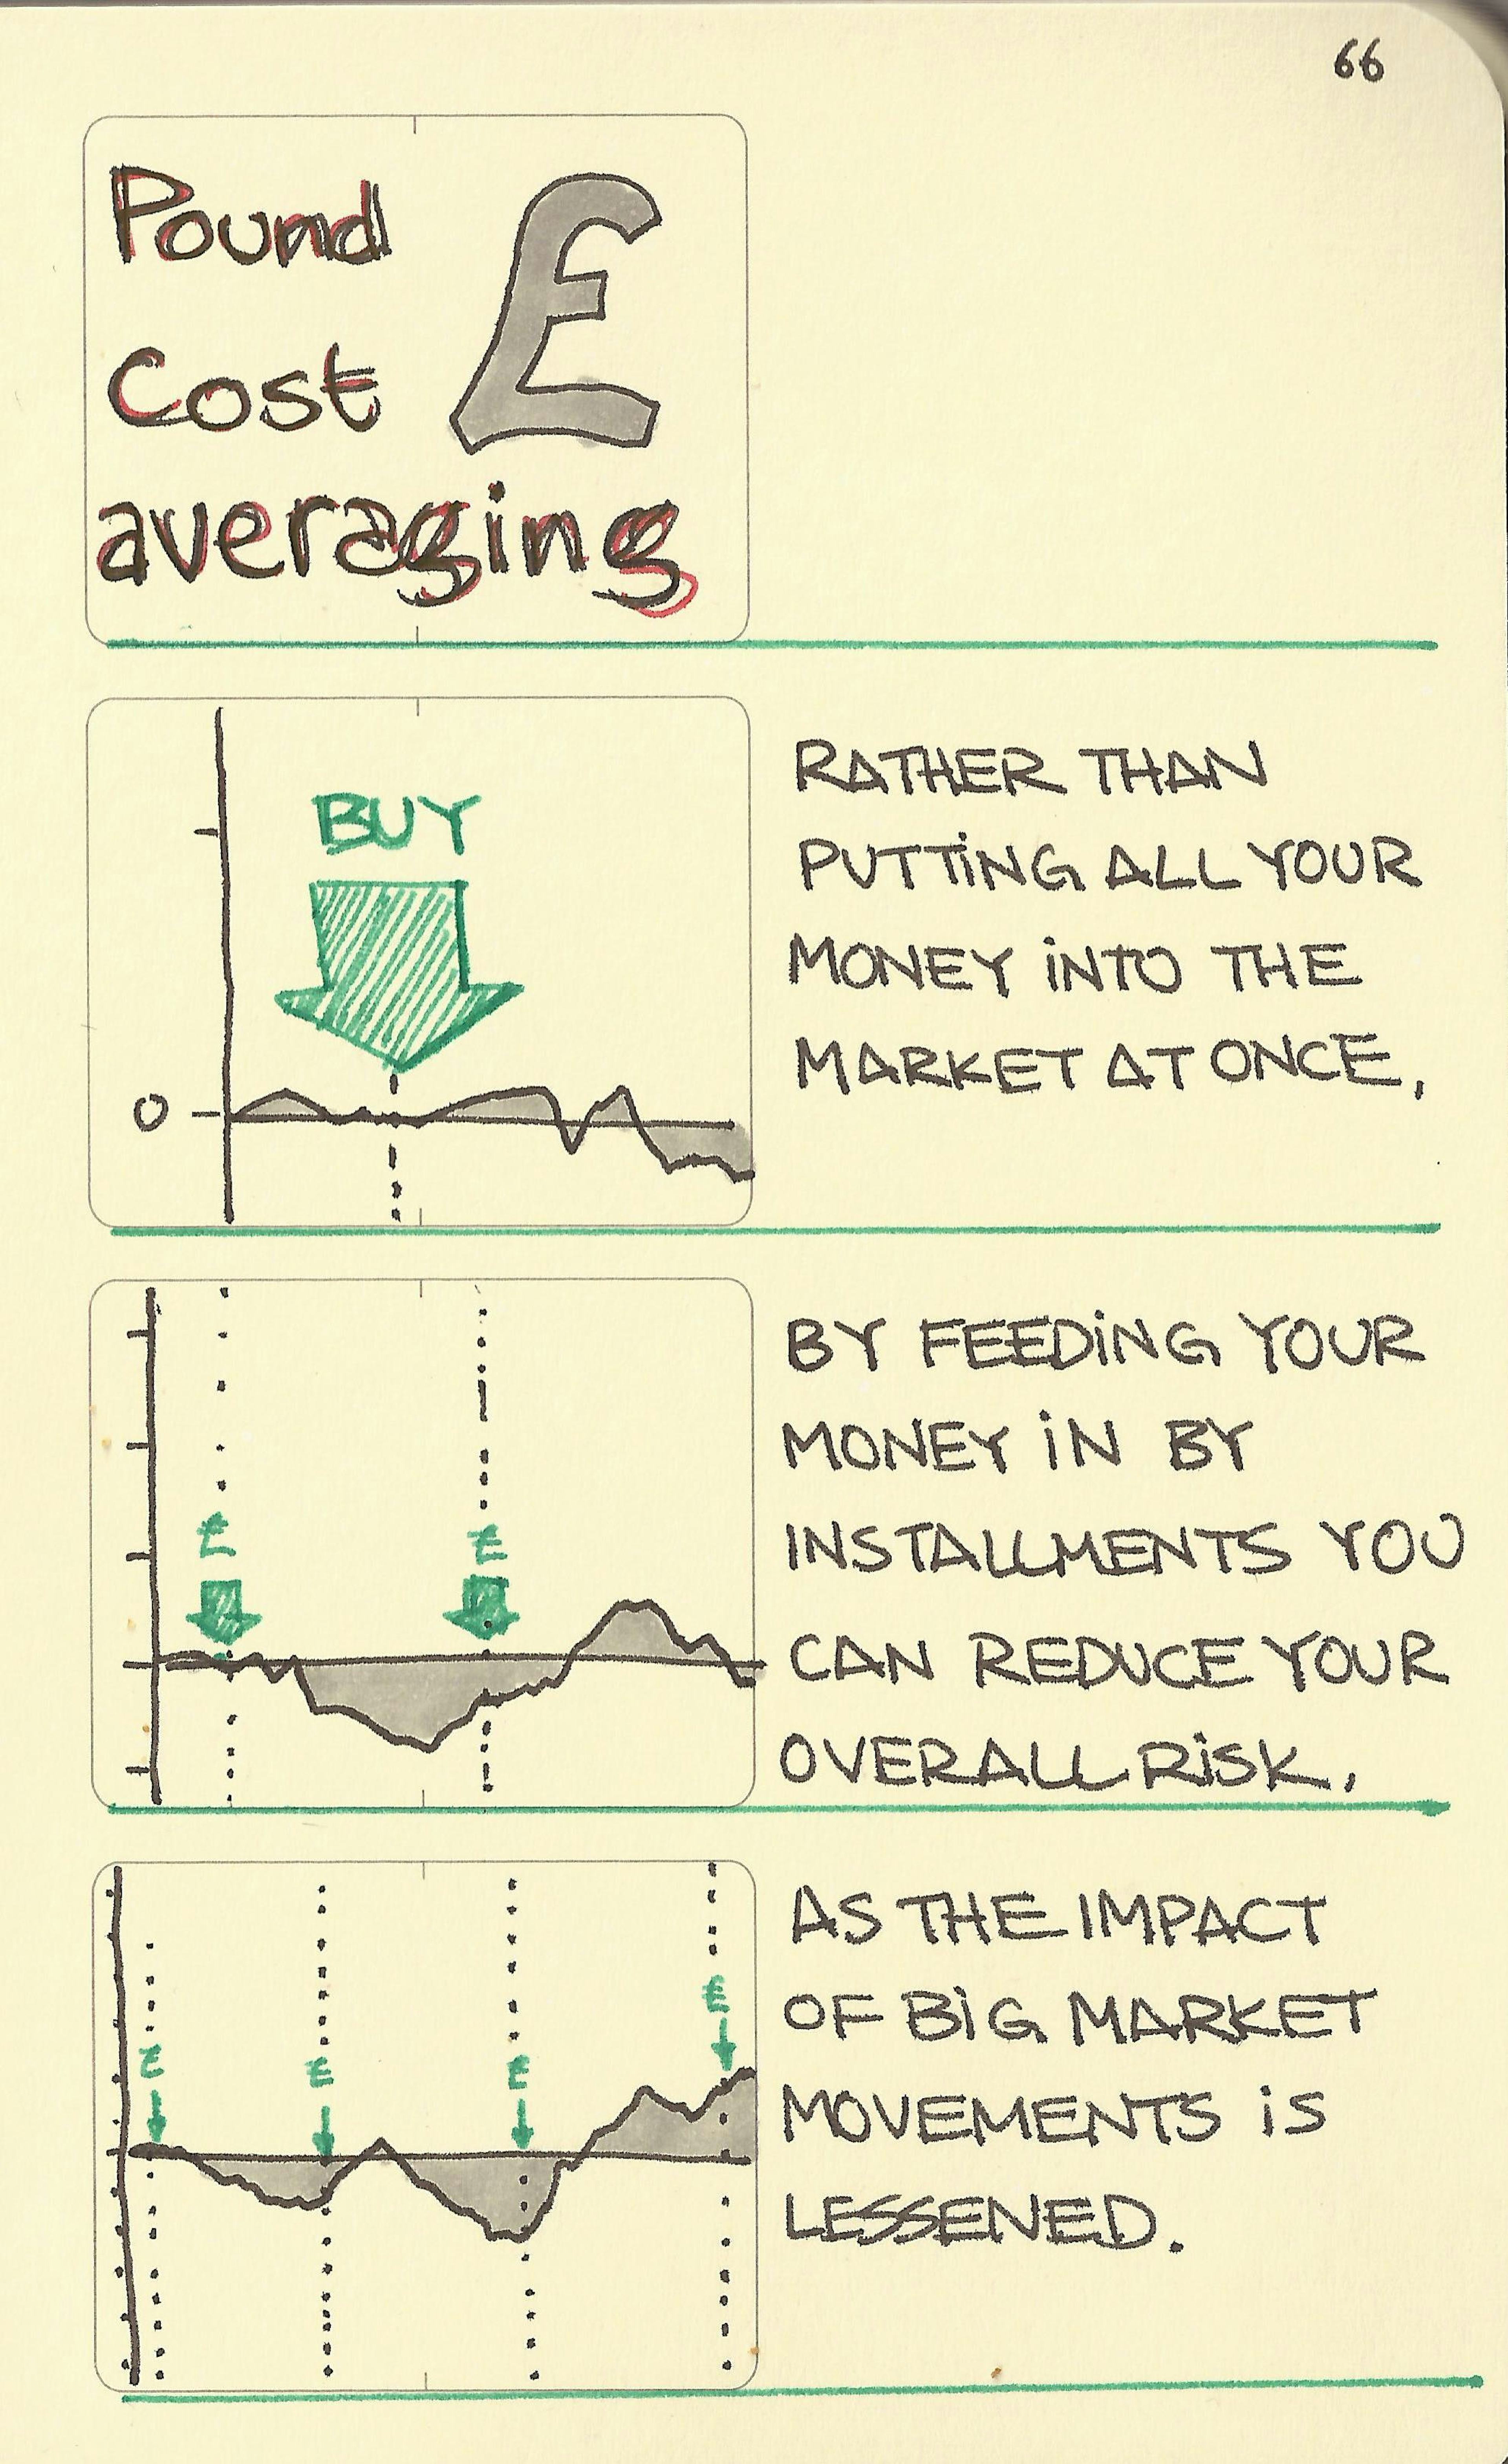 Pound cost averaging - Sketchplanations